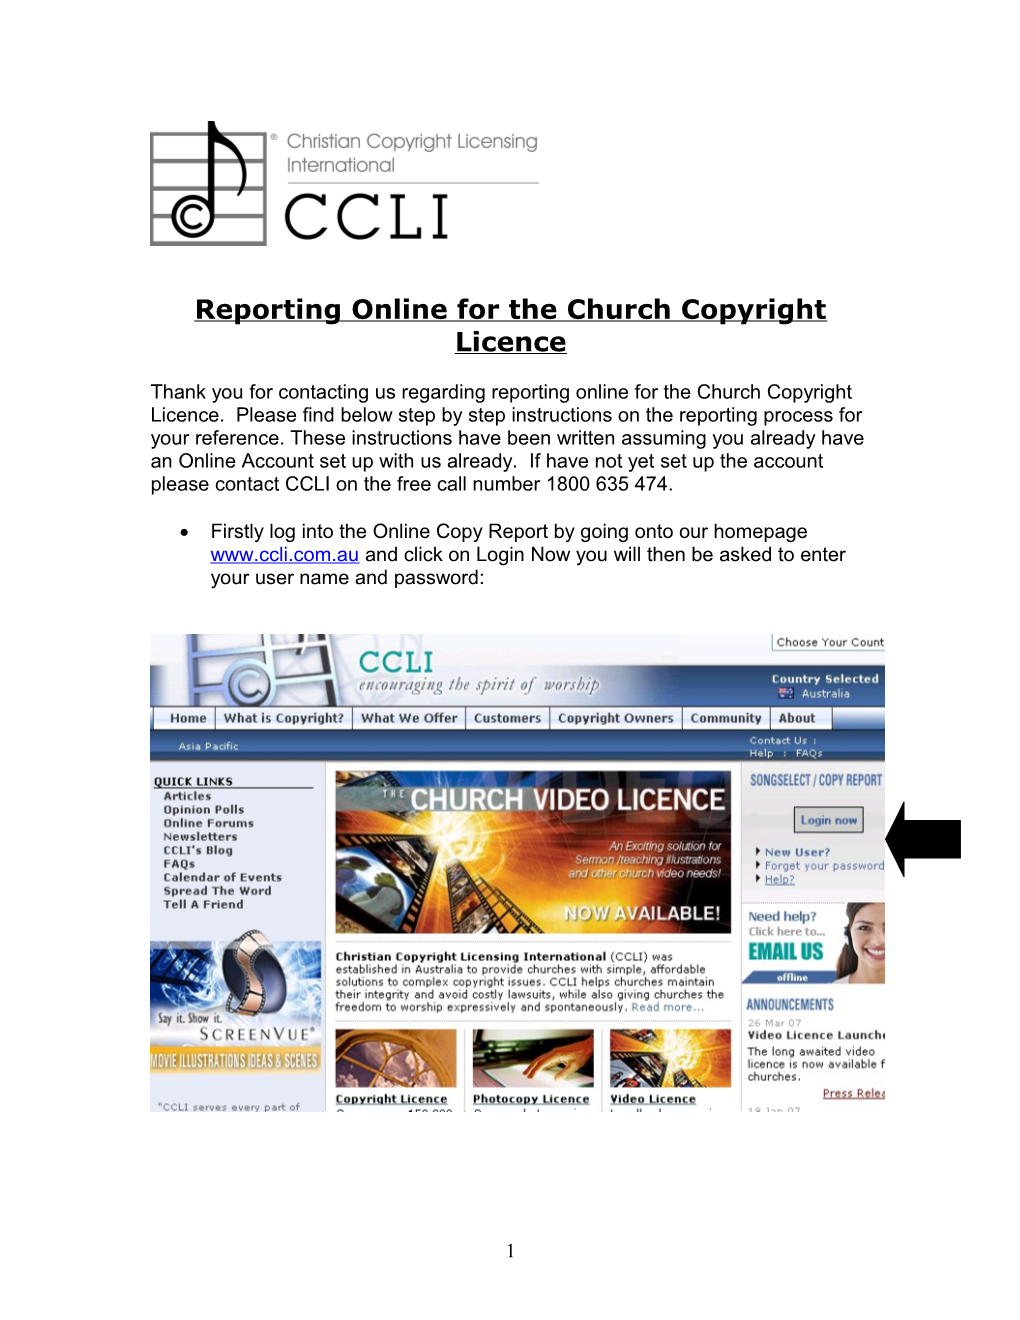 Reporting Online for the Church Copyright Licence